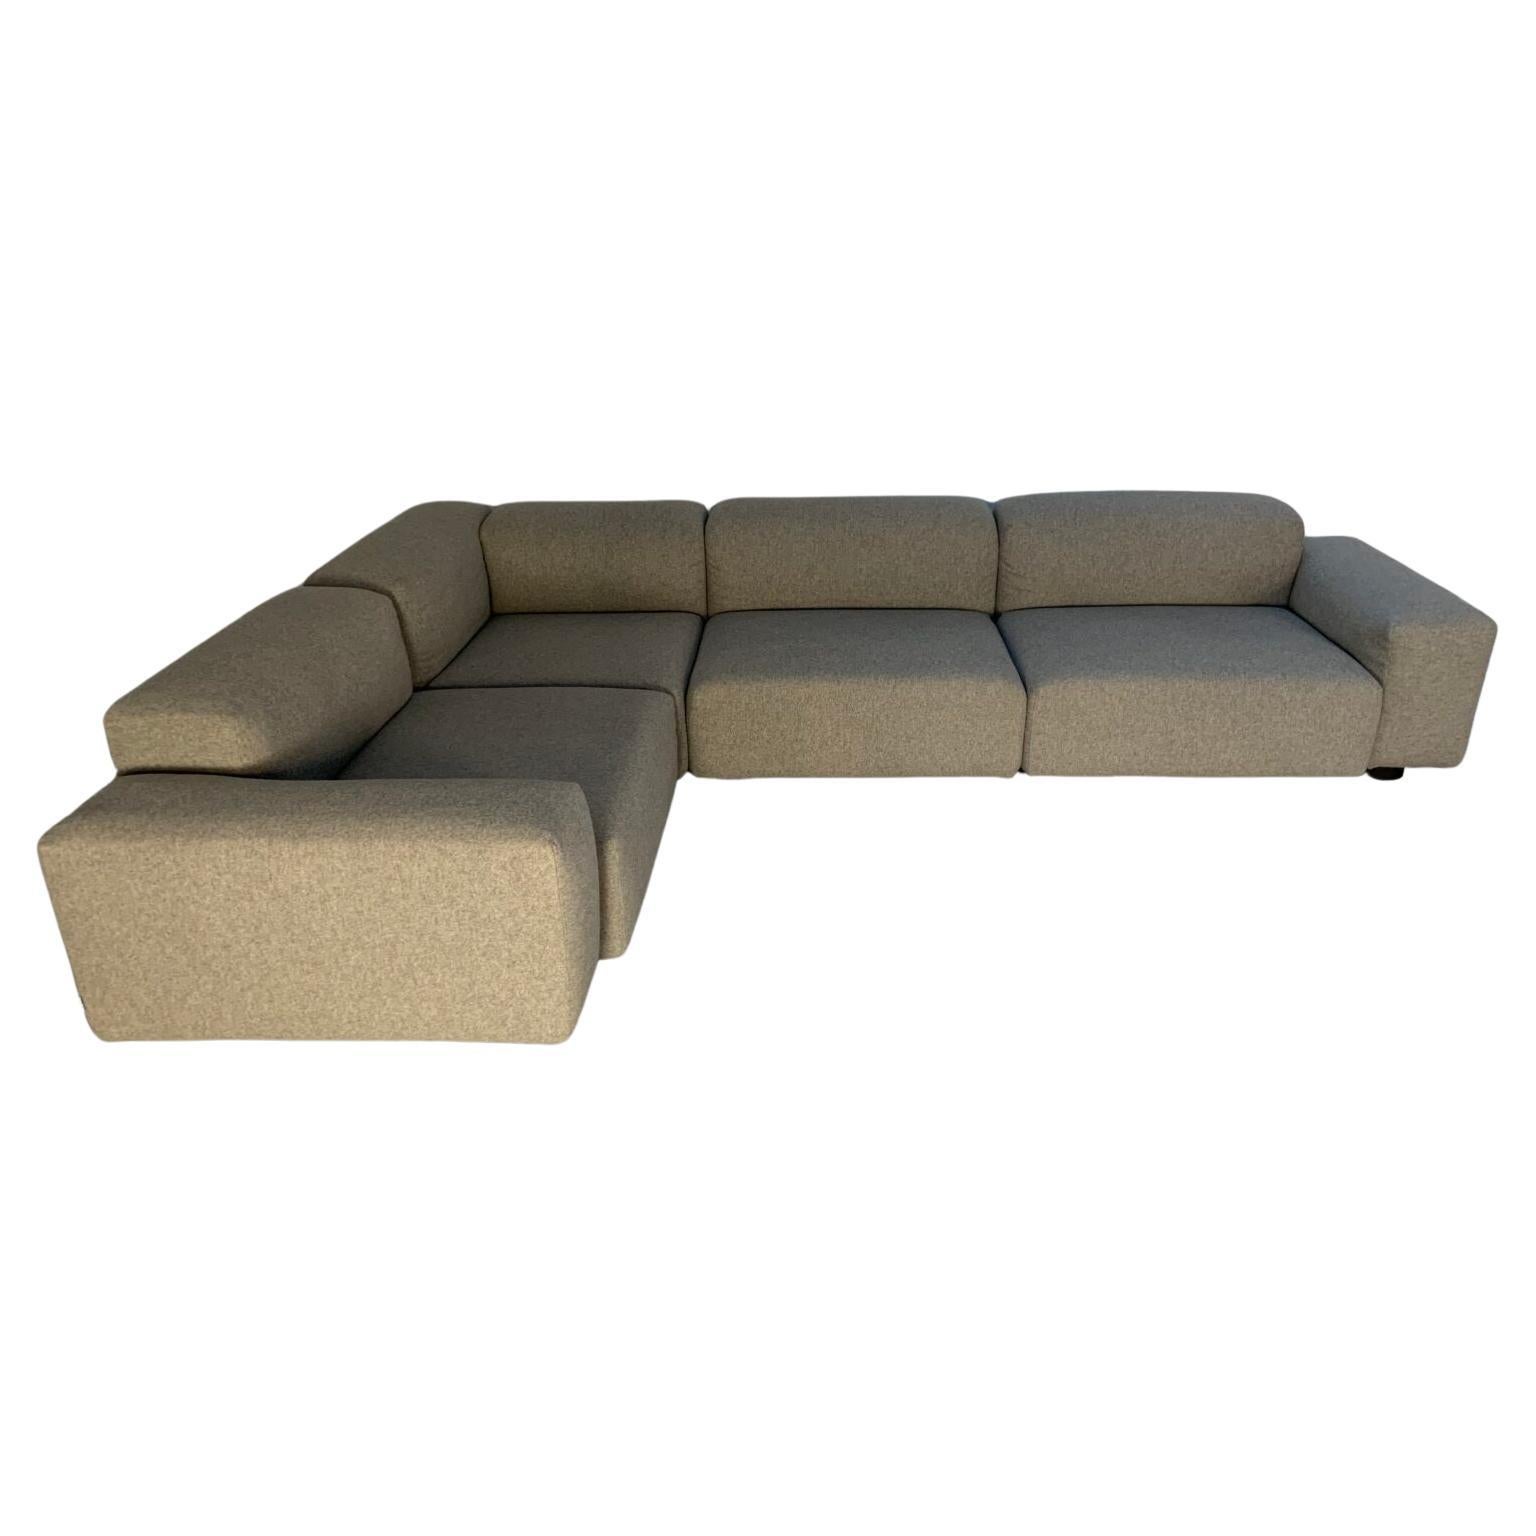 Vitra "Place" L-Shape Sofa - In "Cosy" Grey Wool